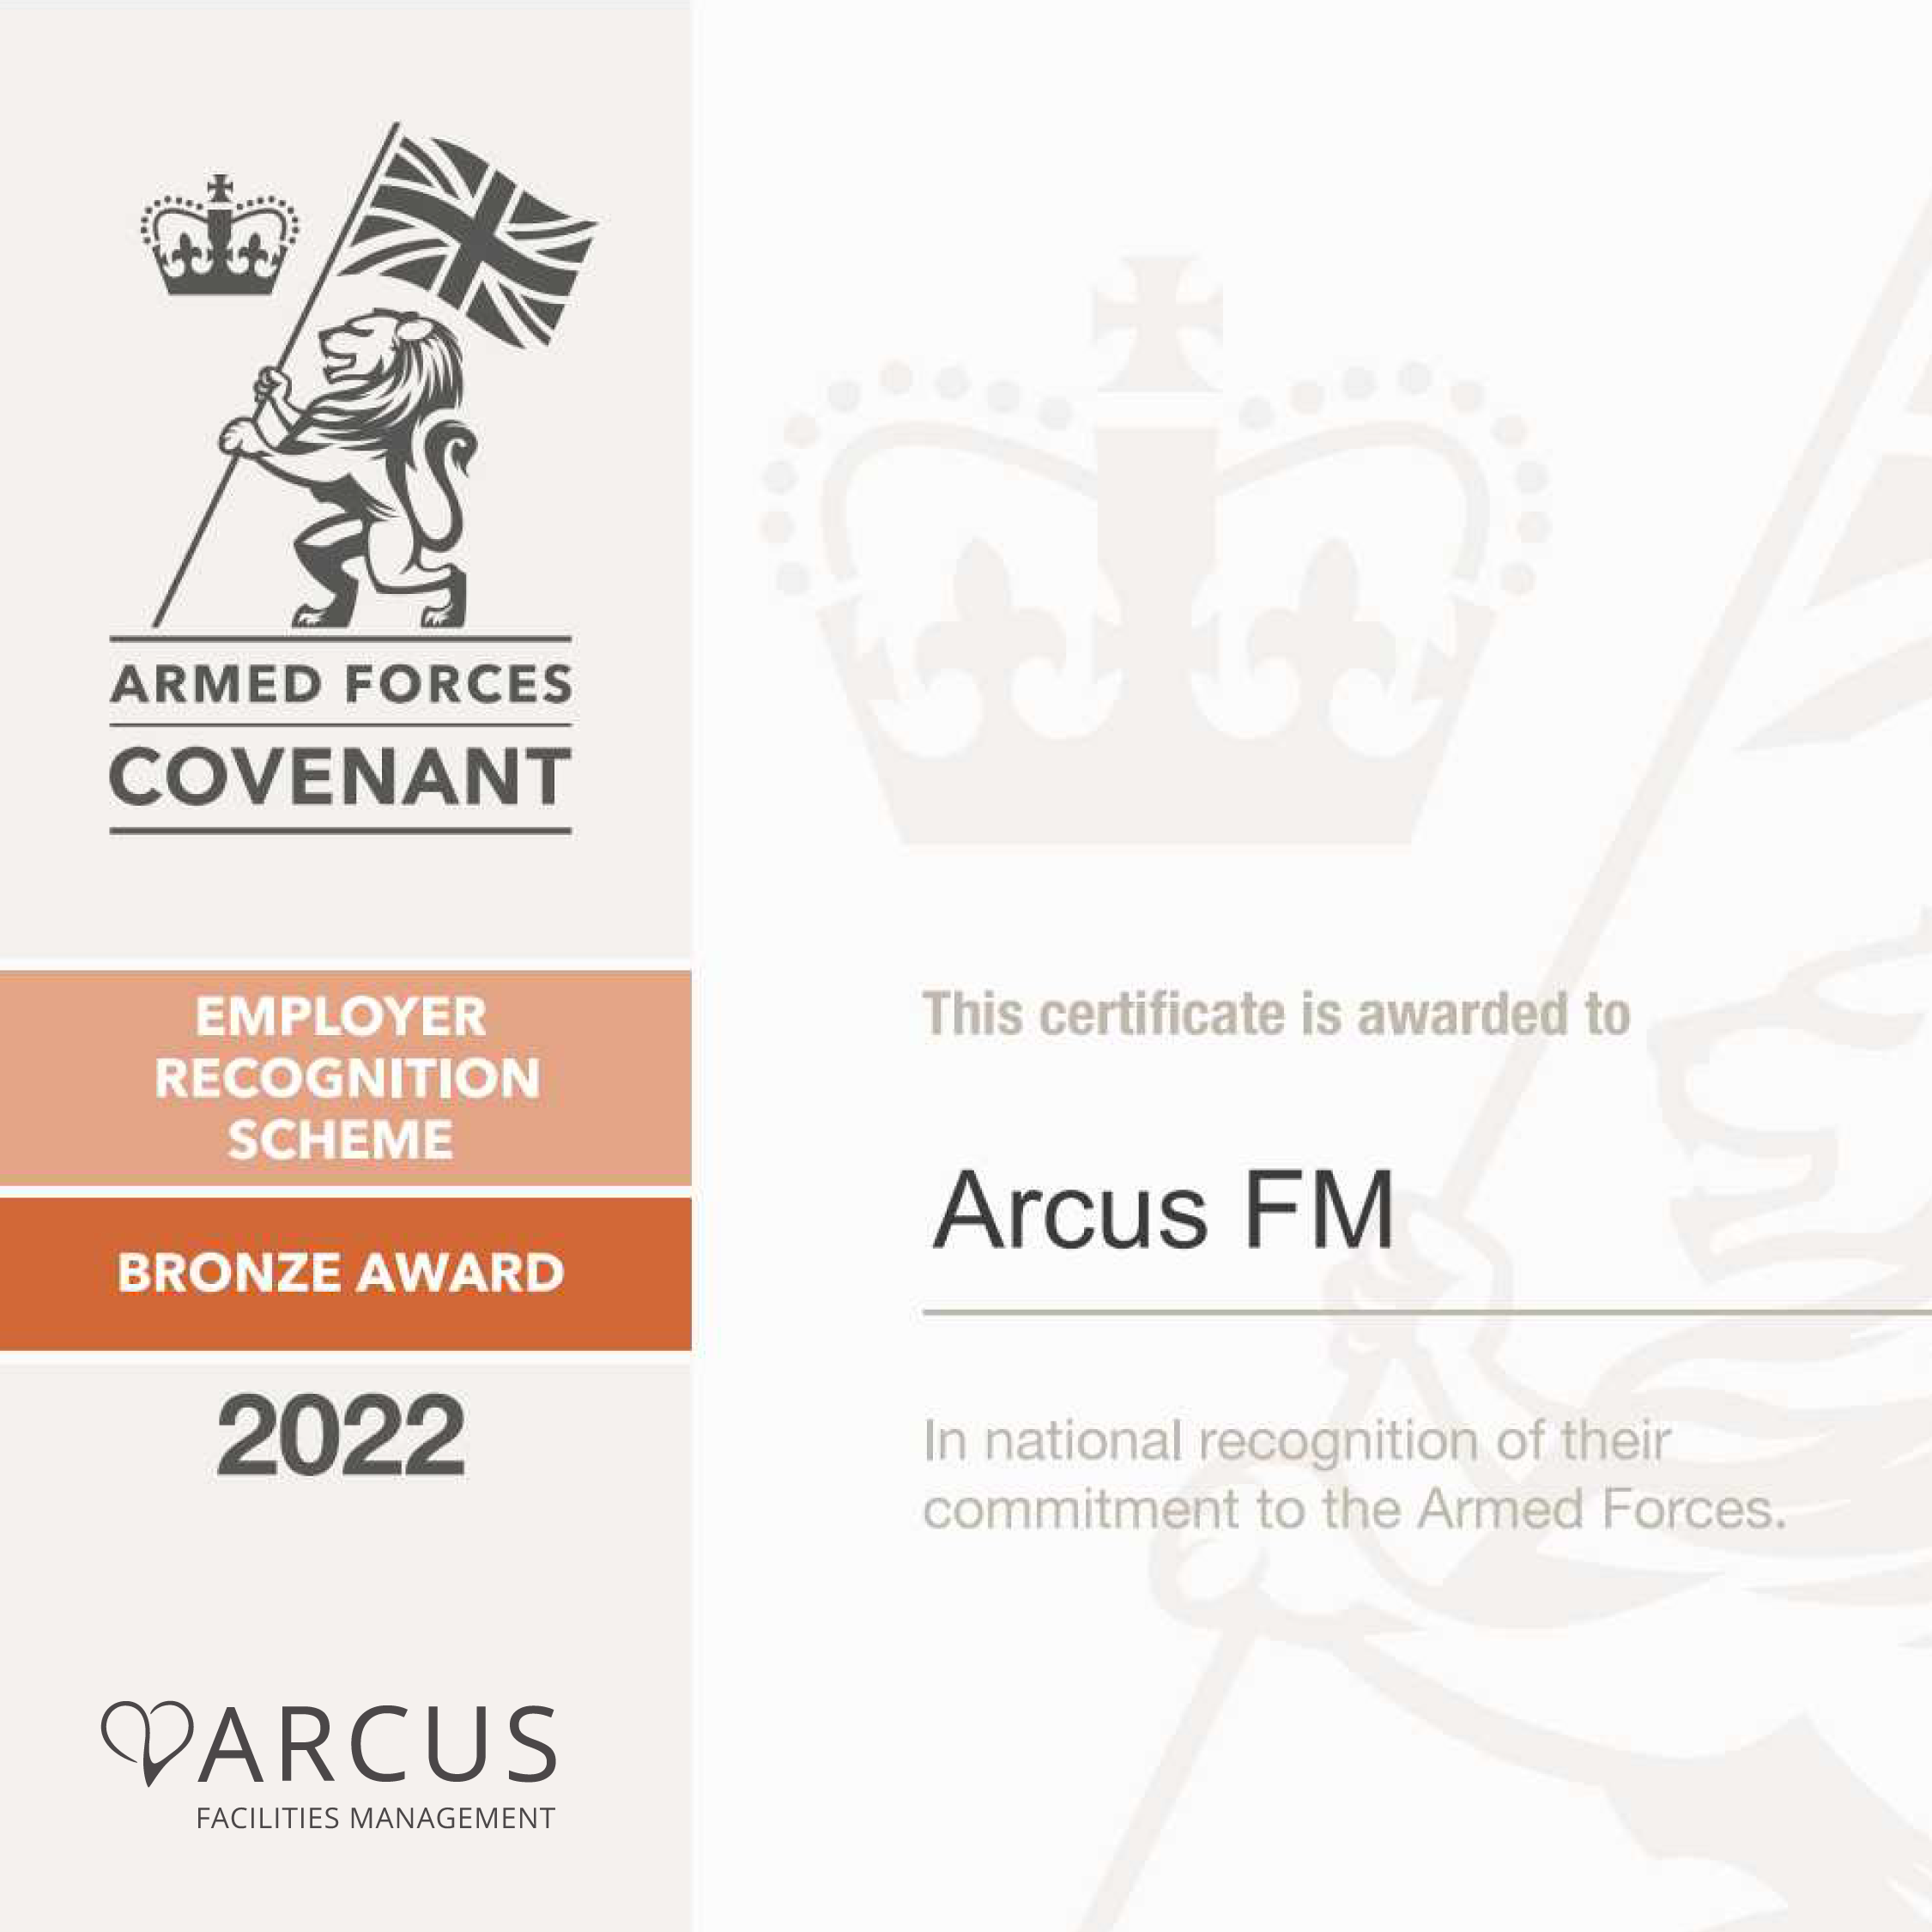 Employer Defence Recognition Certificate - Bronze Awarded to Arcus FM